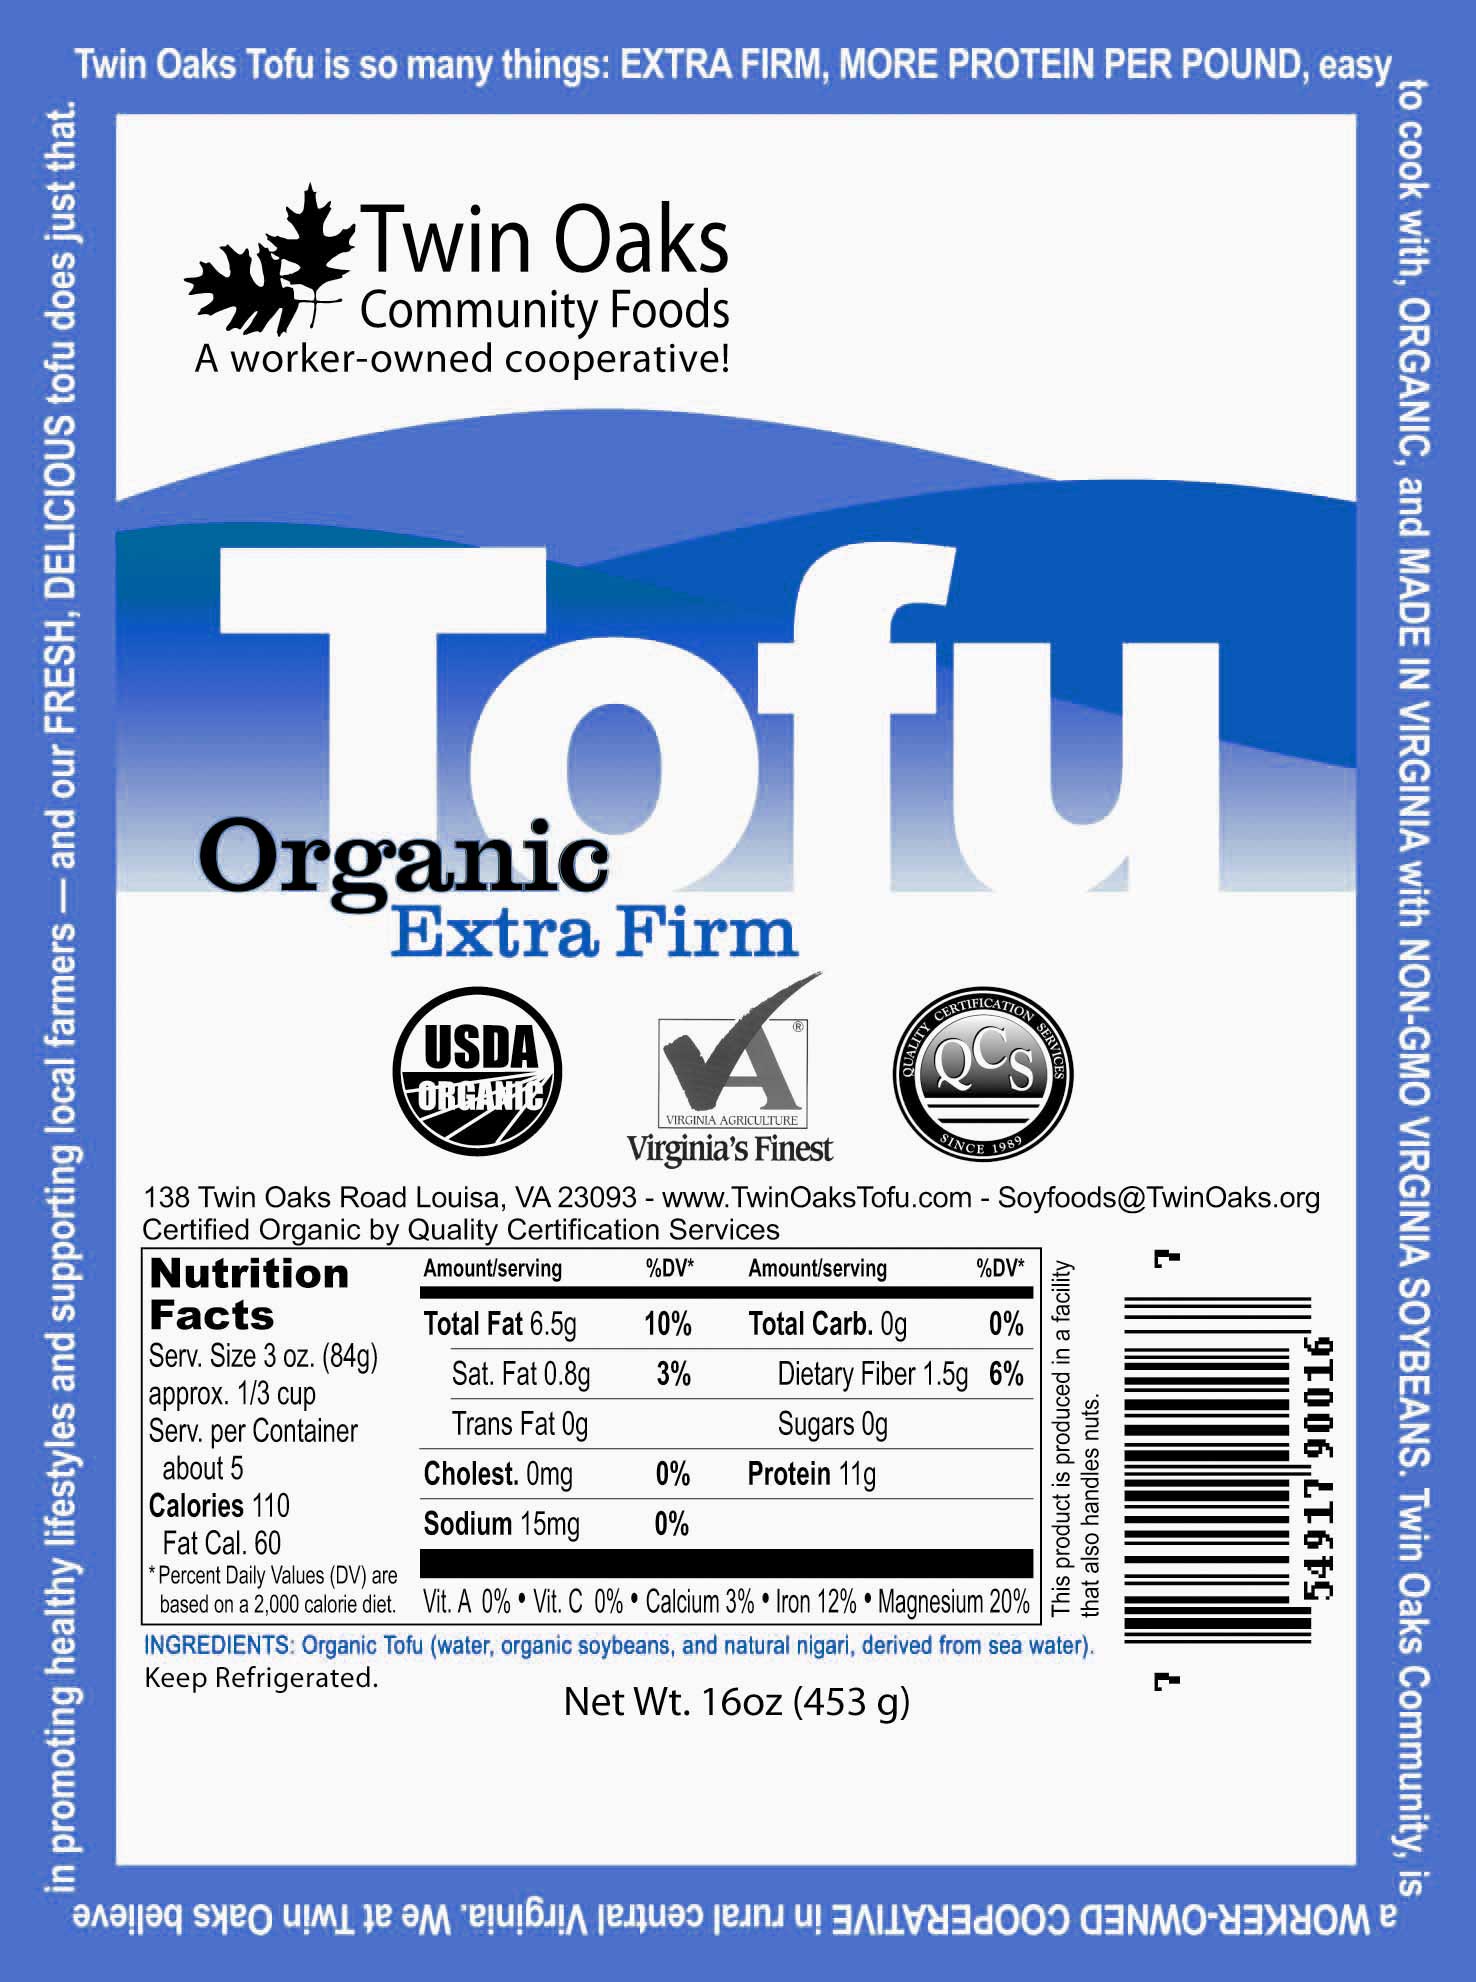 Bbq Baked Tofu Wvtf intended for The Most Elegant  nutrition facts tofu pertaining to  House